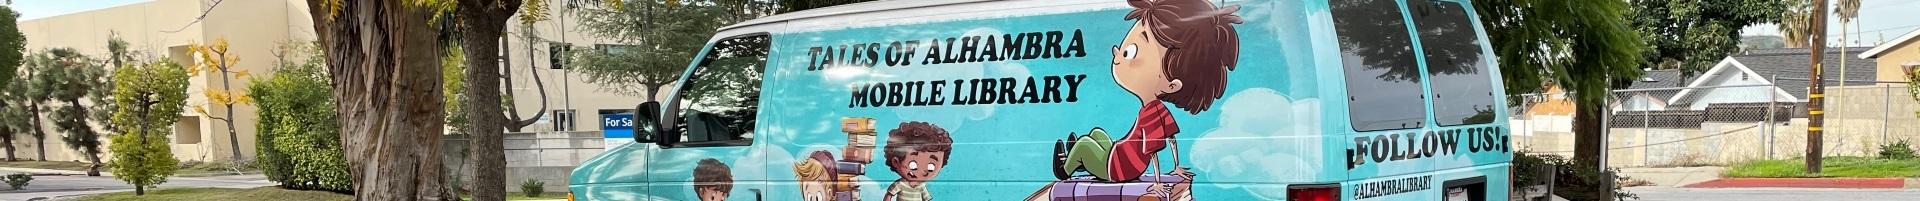 alhambra mobile library